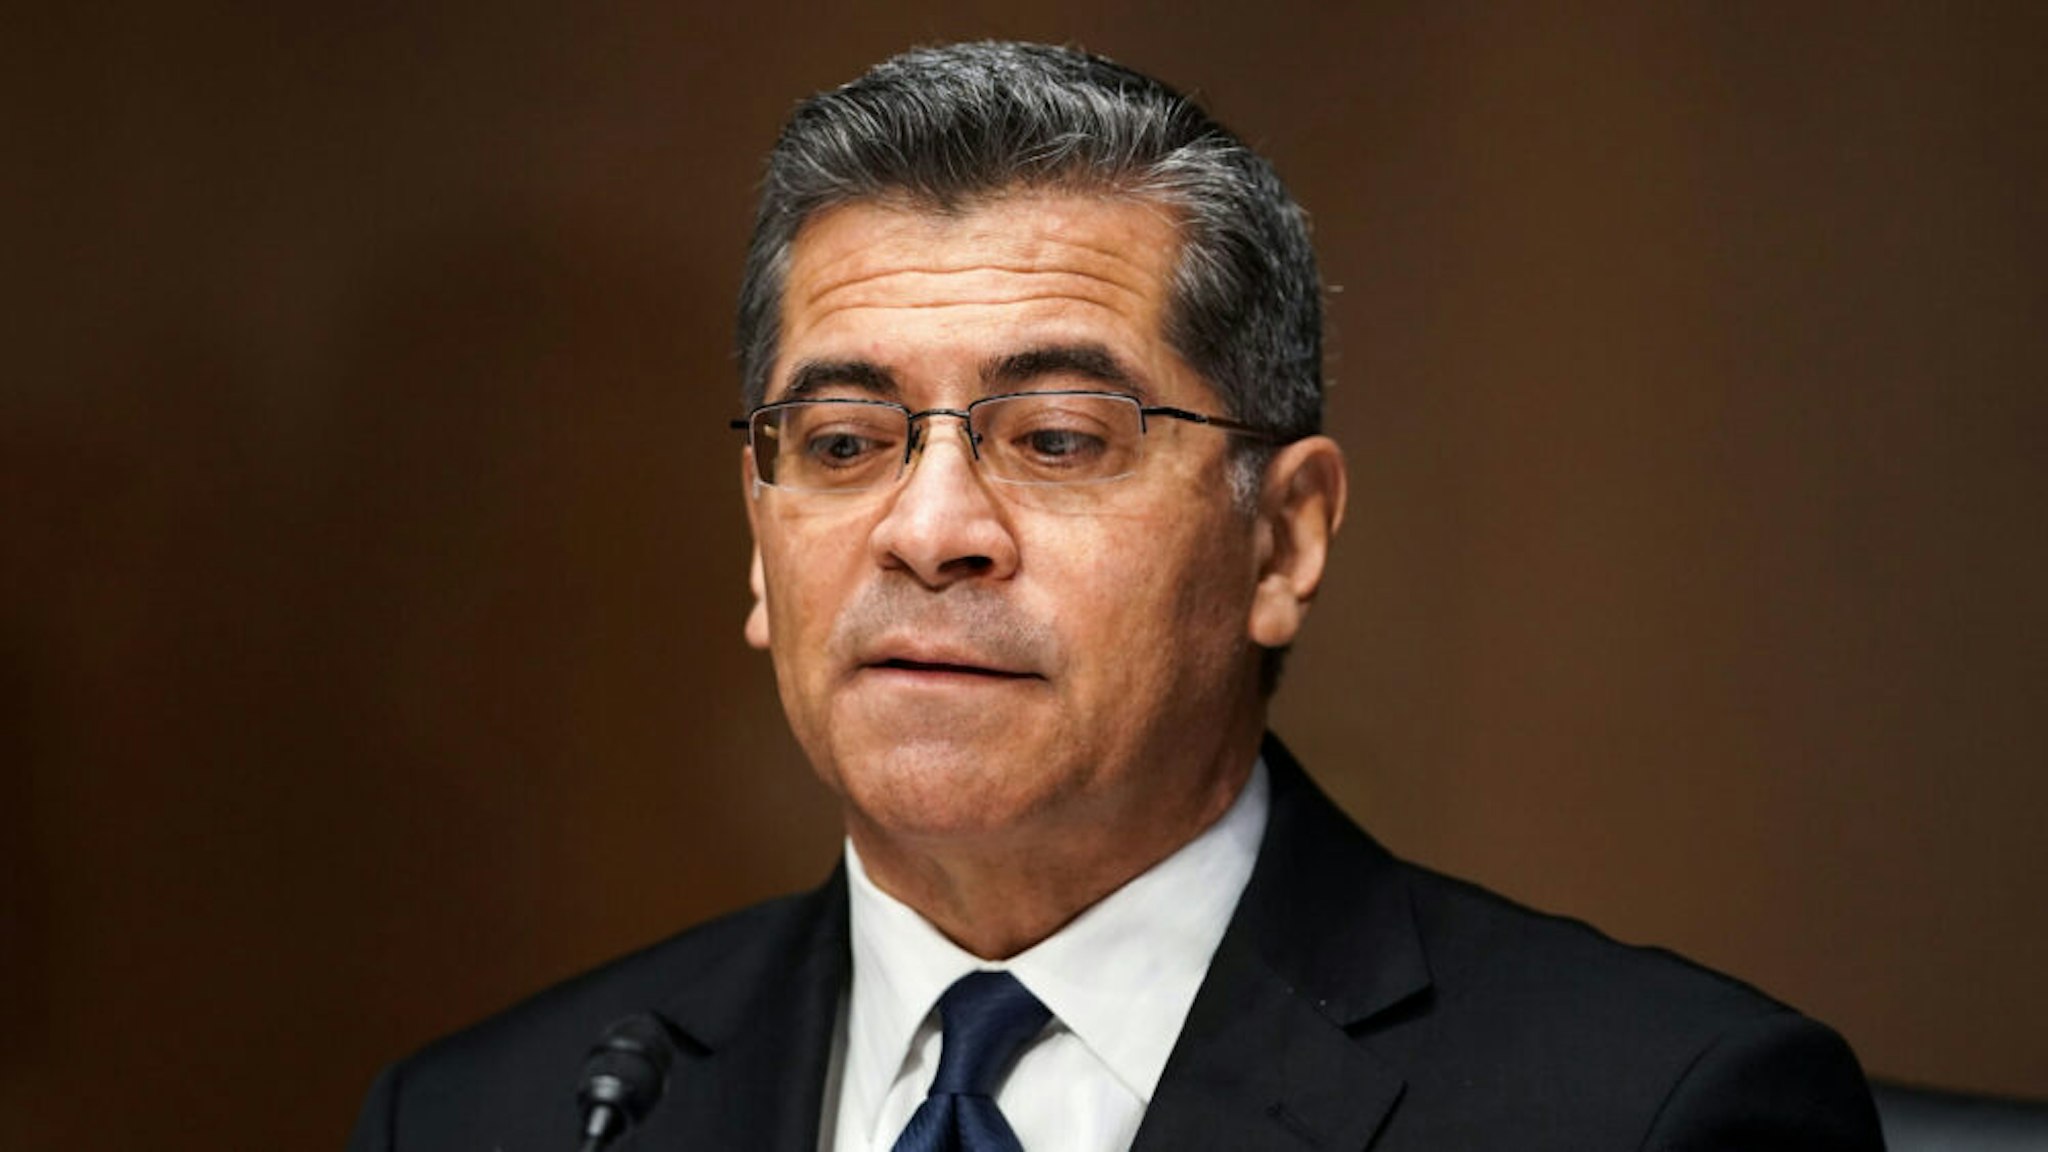 WASHINGTON, DC - FEBRUARY 24: Xavier Becerra, nominee for Secretary of Health and Human Services, answers questions during his confirmation hearing before the Senate Finance Committee on Capitol Hill on February 24, 2021 in Washington, DC. If confirmed, Becerra would be the first Latino secretary of HHS. He is currently Attorney General of California.